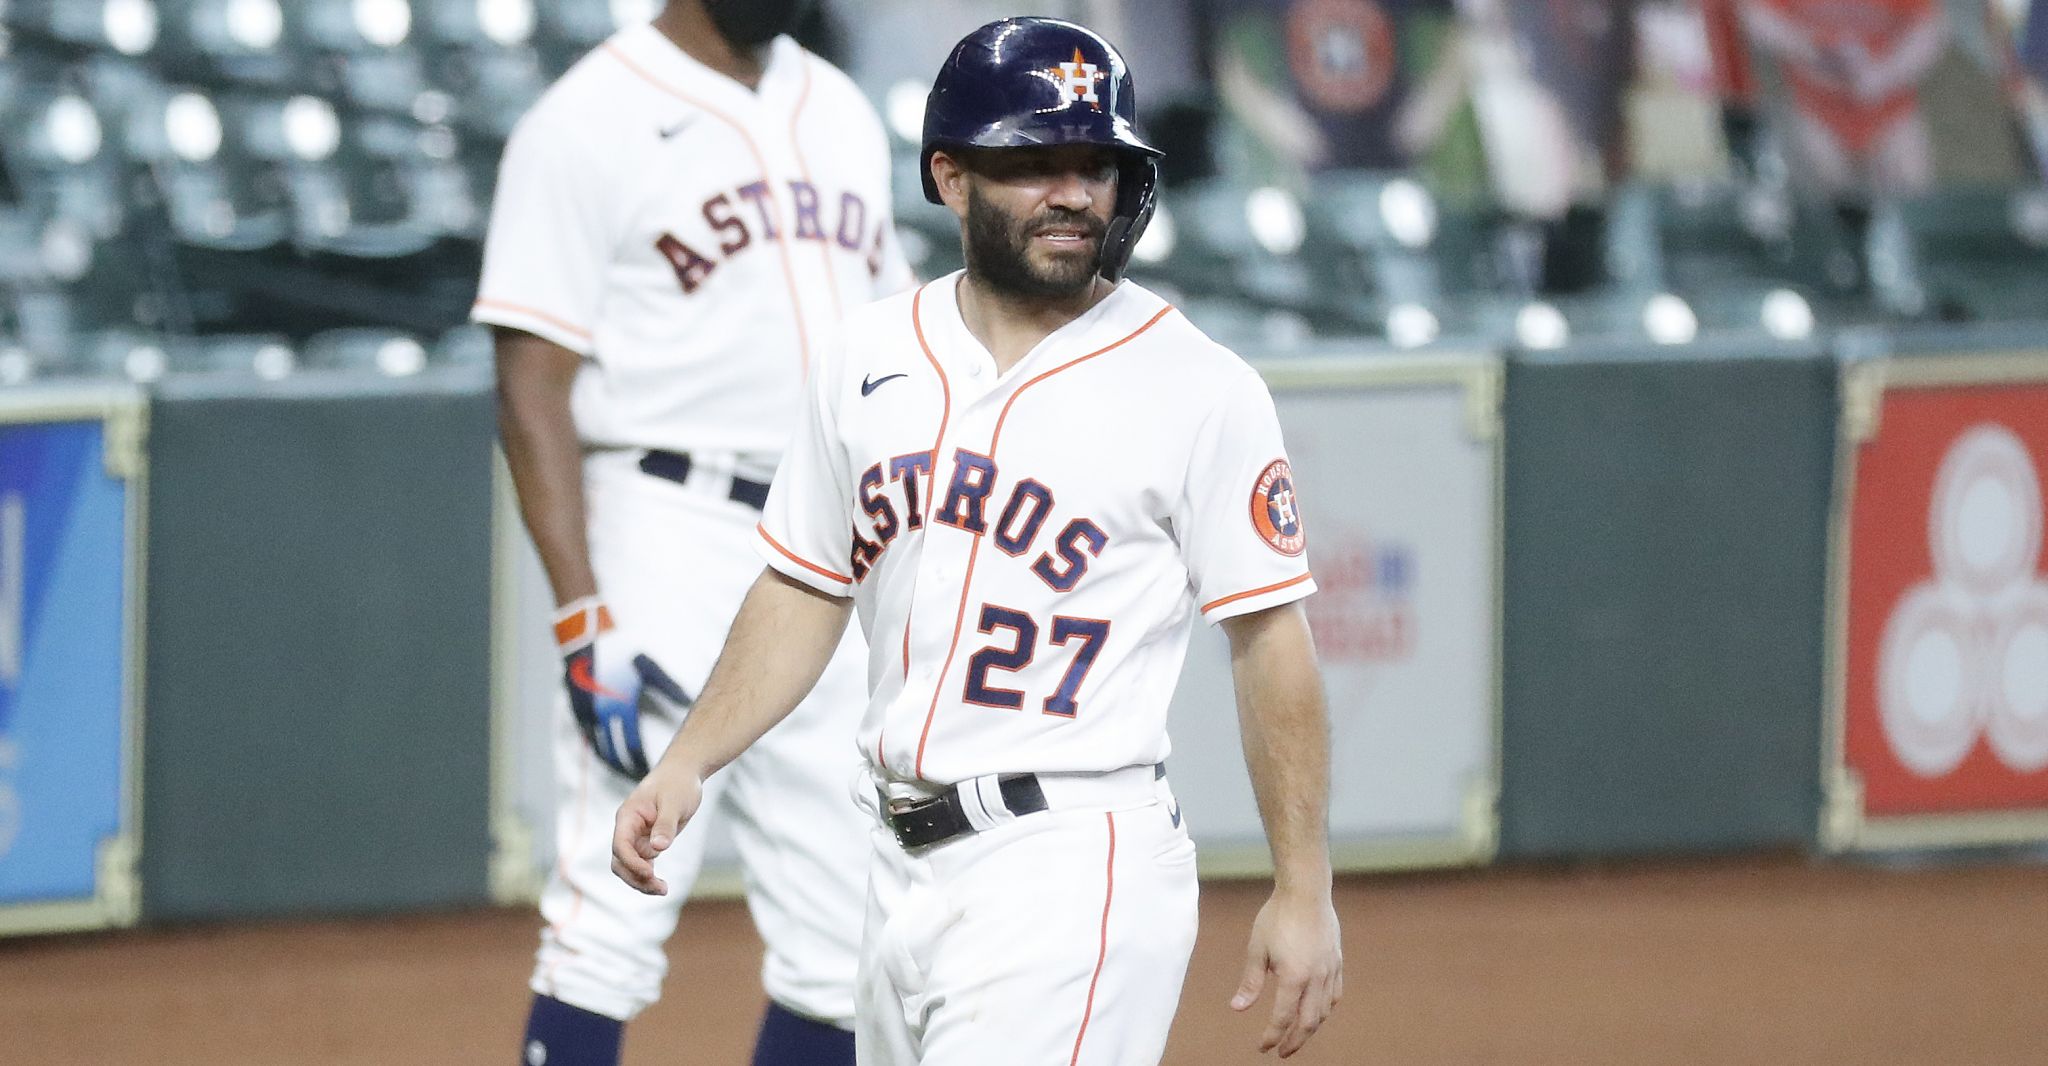 José Altuve likely to miss Angels series with sprained knee - HoustonChronicle.com